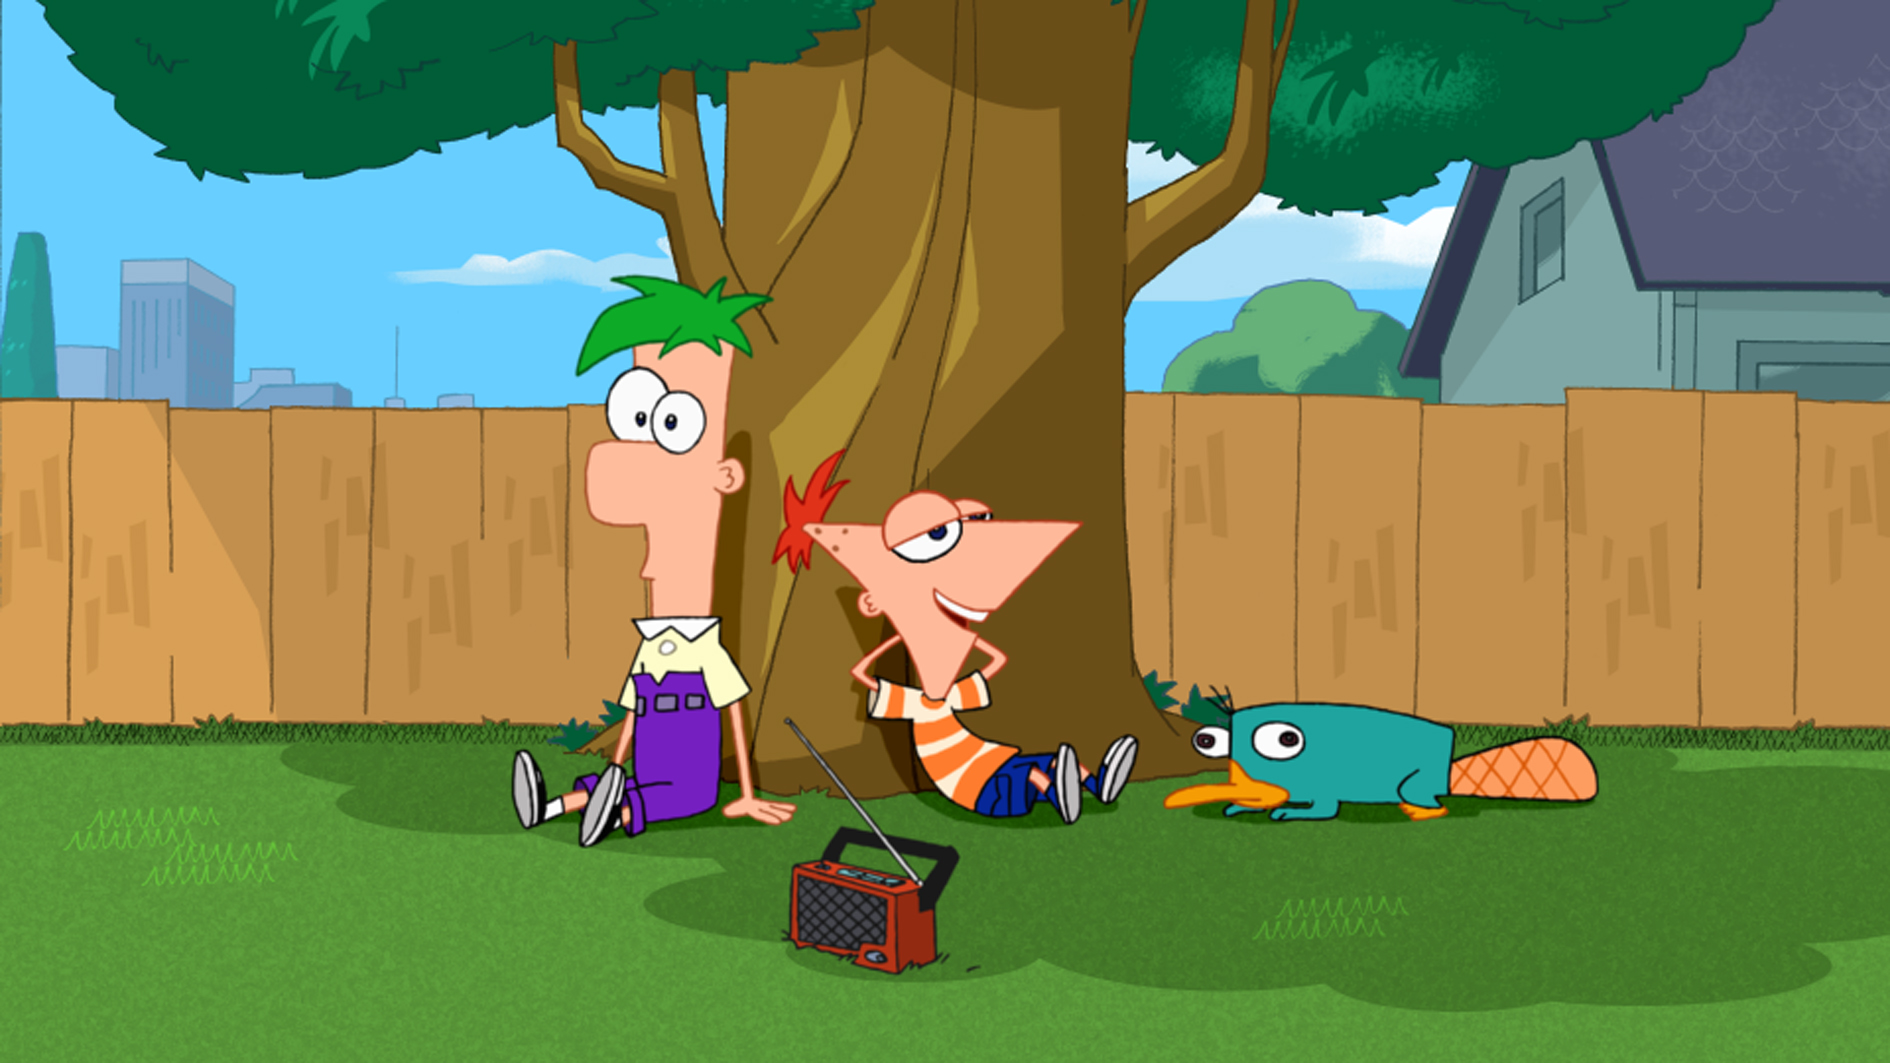 phineas and ferb girl sex